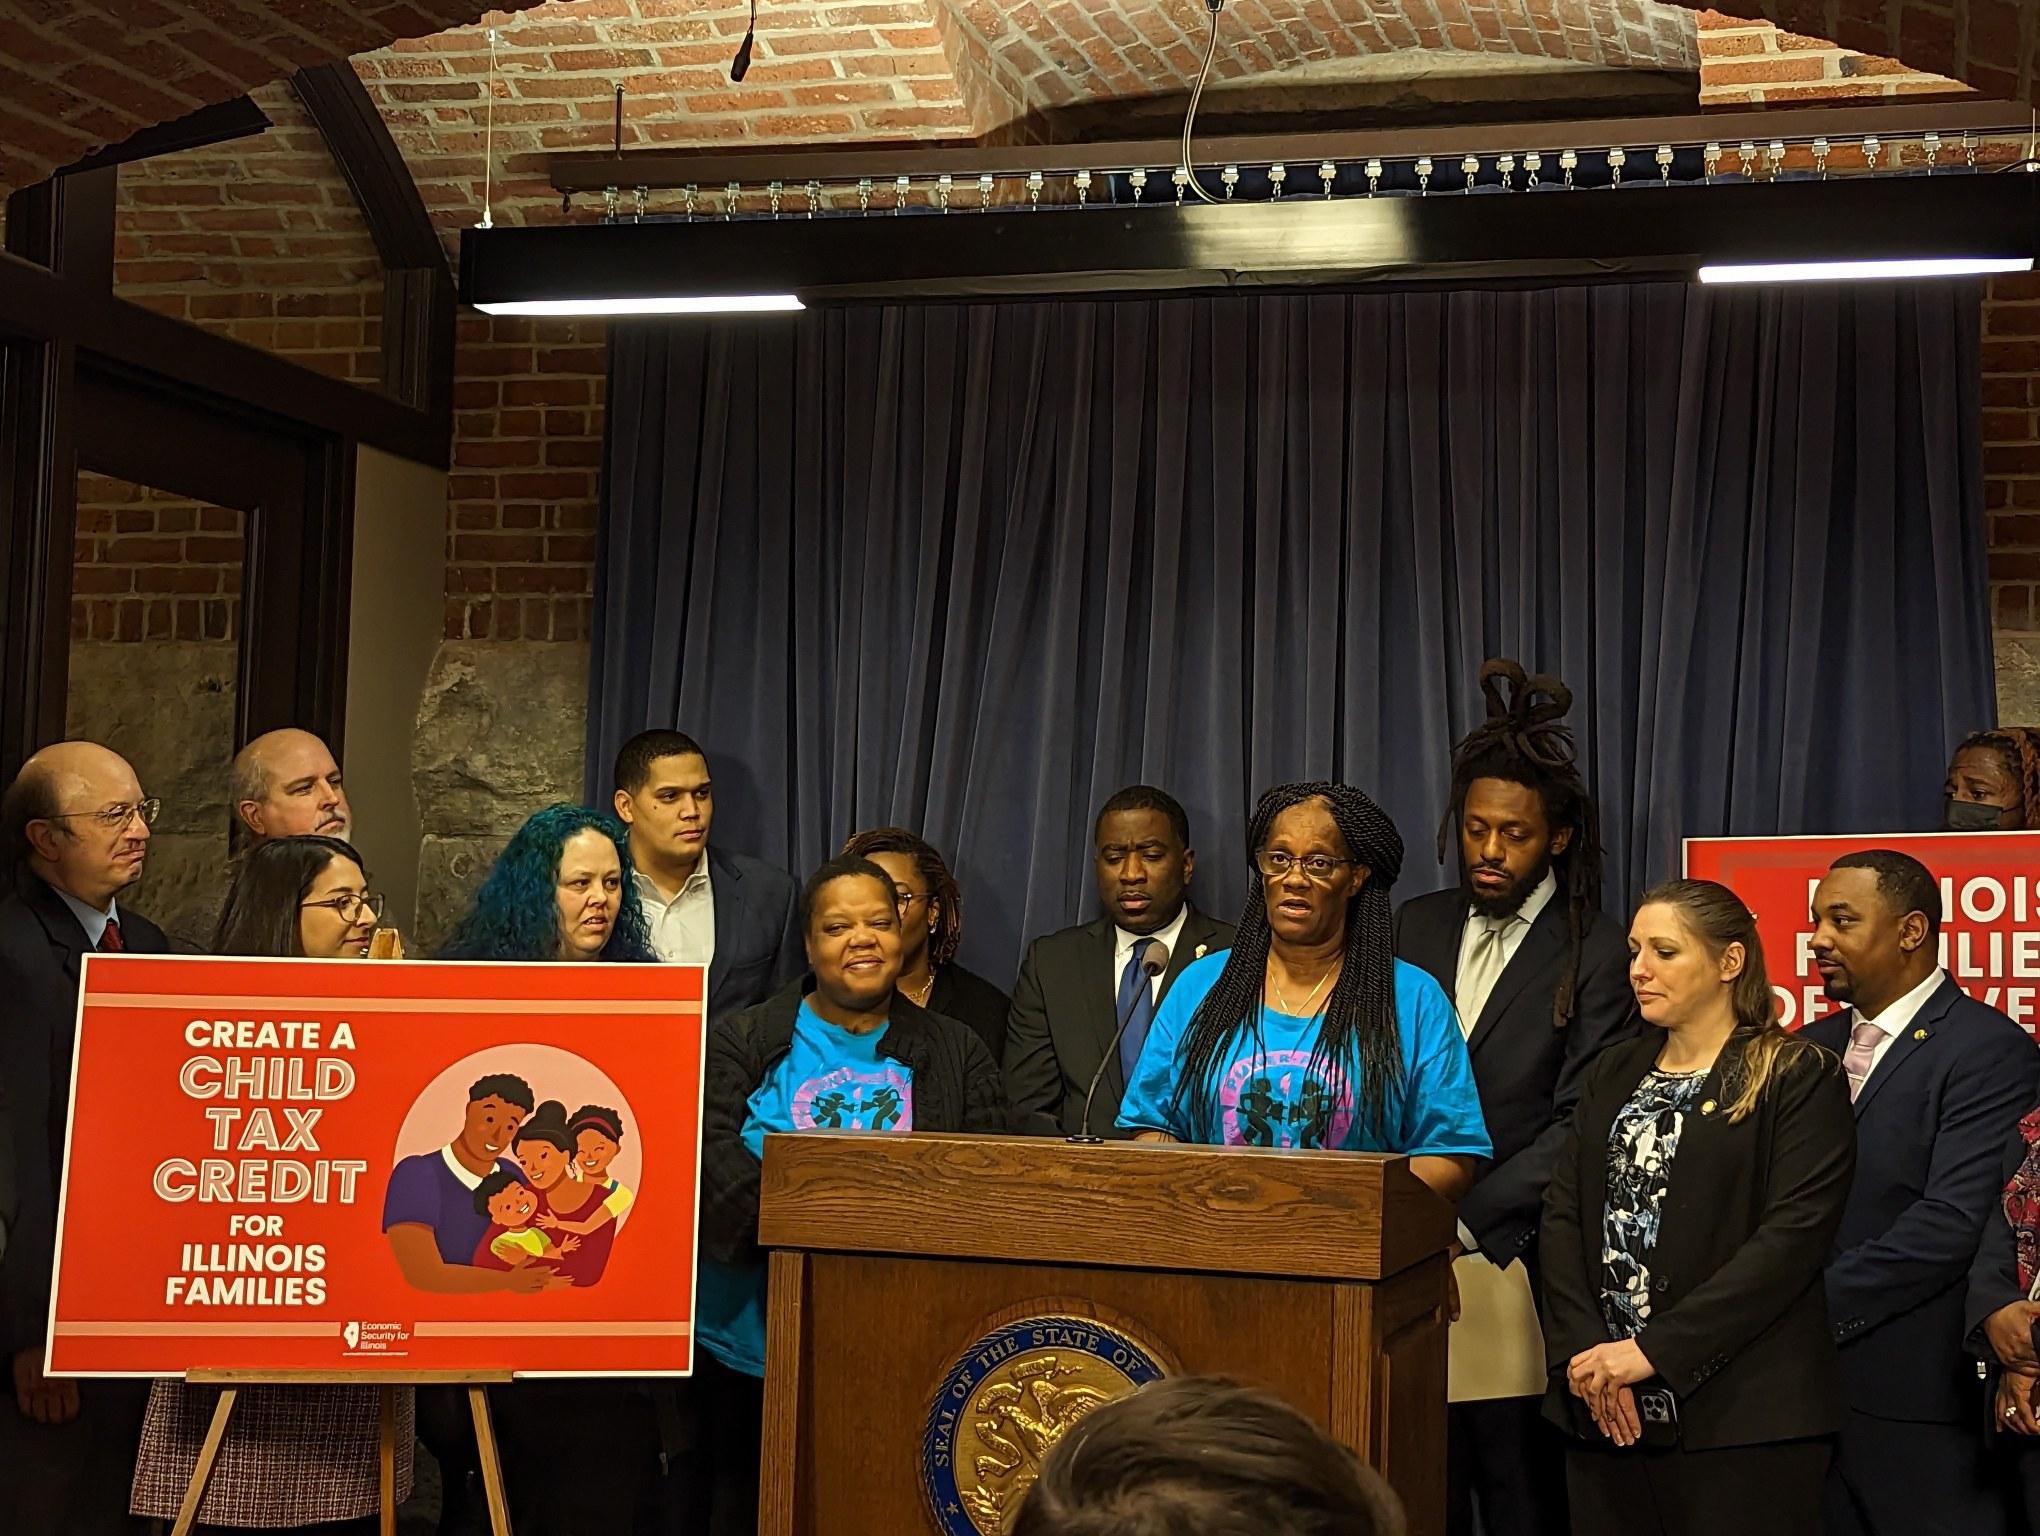 An African-American woman, a POWER-PAC IL parent leader, speaks in support of the Child Tax Credit at a podium in the Illinois State Capitol. Standing around her are other POWER-PAC IL members, COFI staff, state legislators, and community advocates.